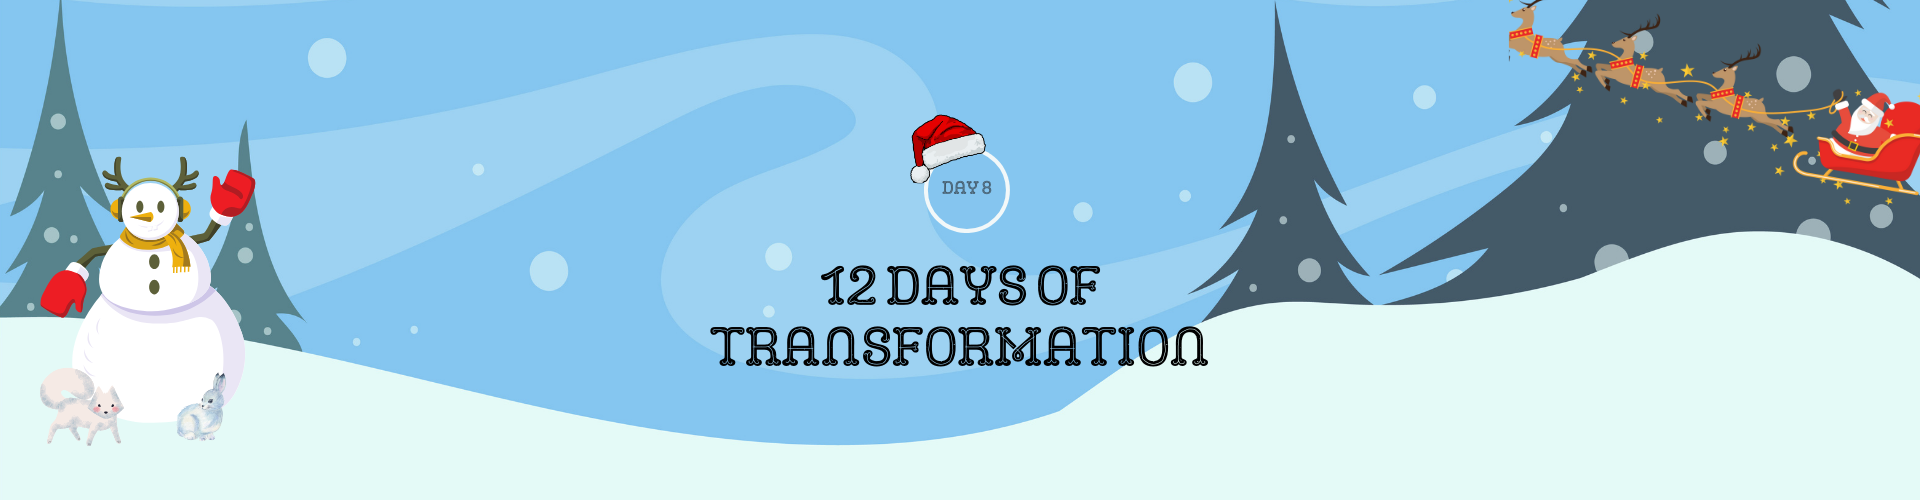 12 Days of Transformation Blog Banner | Festive winter holidays-themed banner with a cheerful snowman and Santa Claus riding his sleigh | Day 8